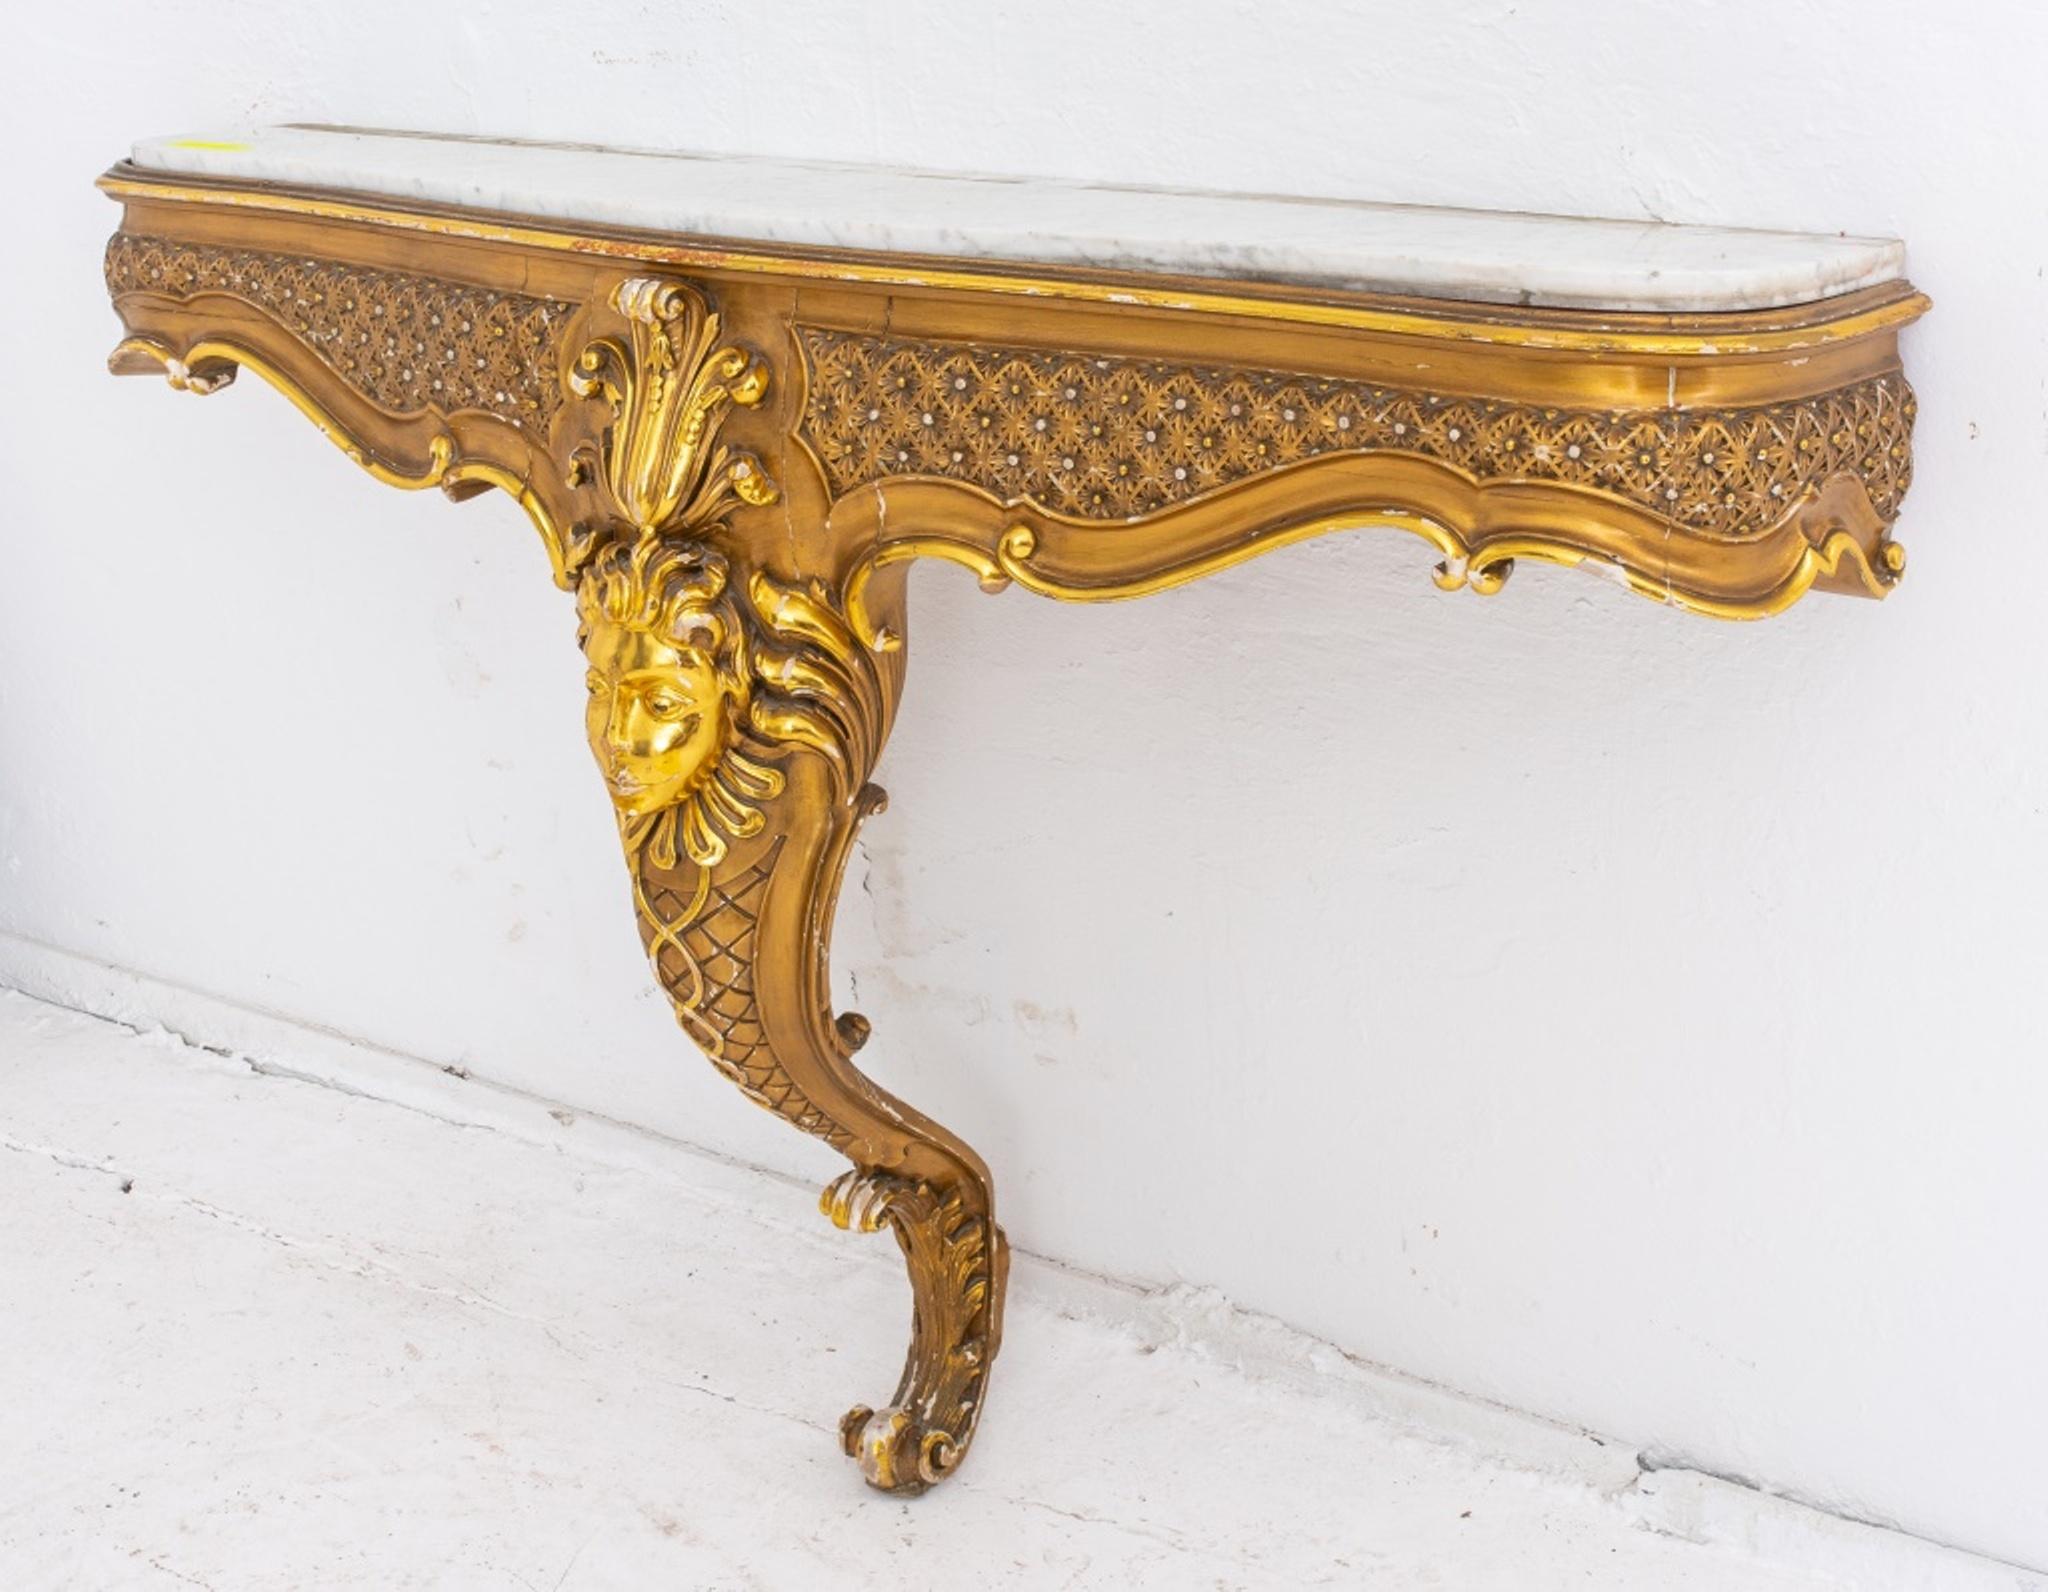 Louis XIV fantasy style monopodal console, the shaped rectangular top above a molded frame, the sides and fronts with a rosette diapered pattern, centering a floral crowned masque above a scrolling foliate volute leg. In very good vintage condition.